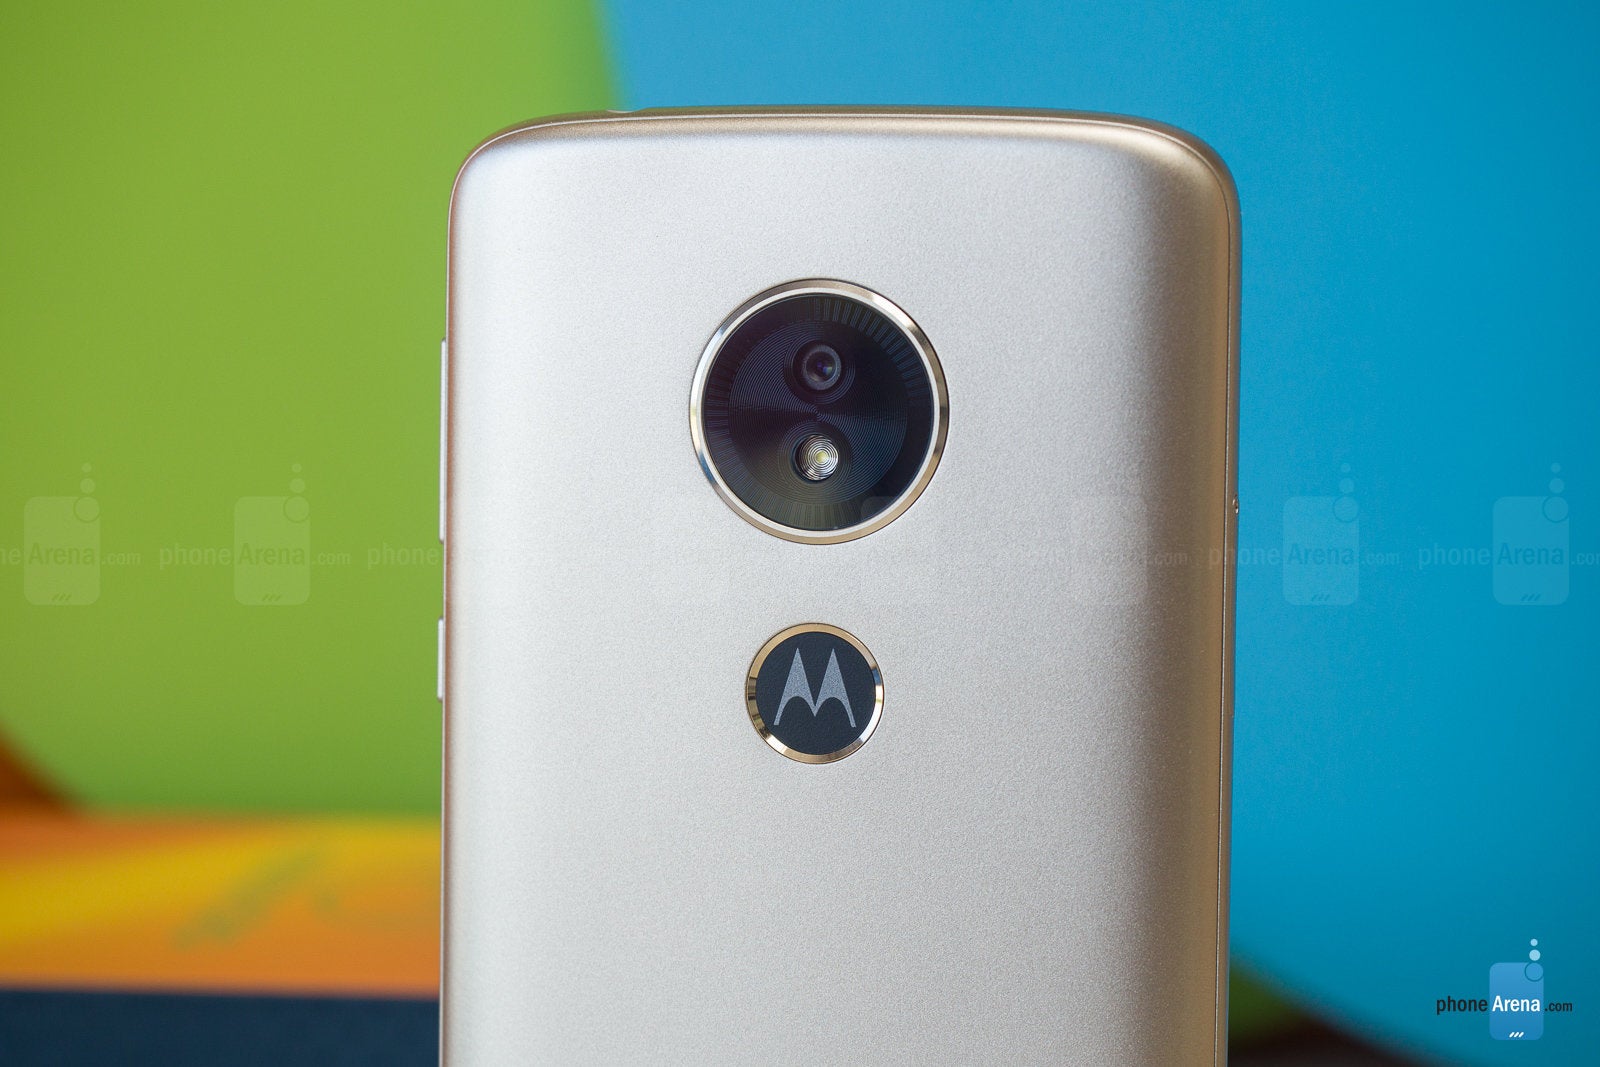 Moto E5 hands-on: big battery and clean Android on the cheap